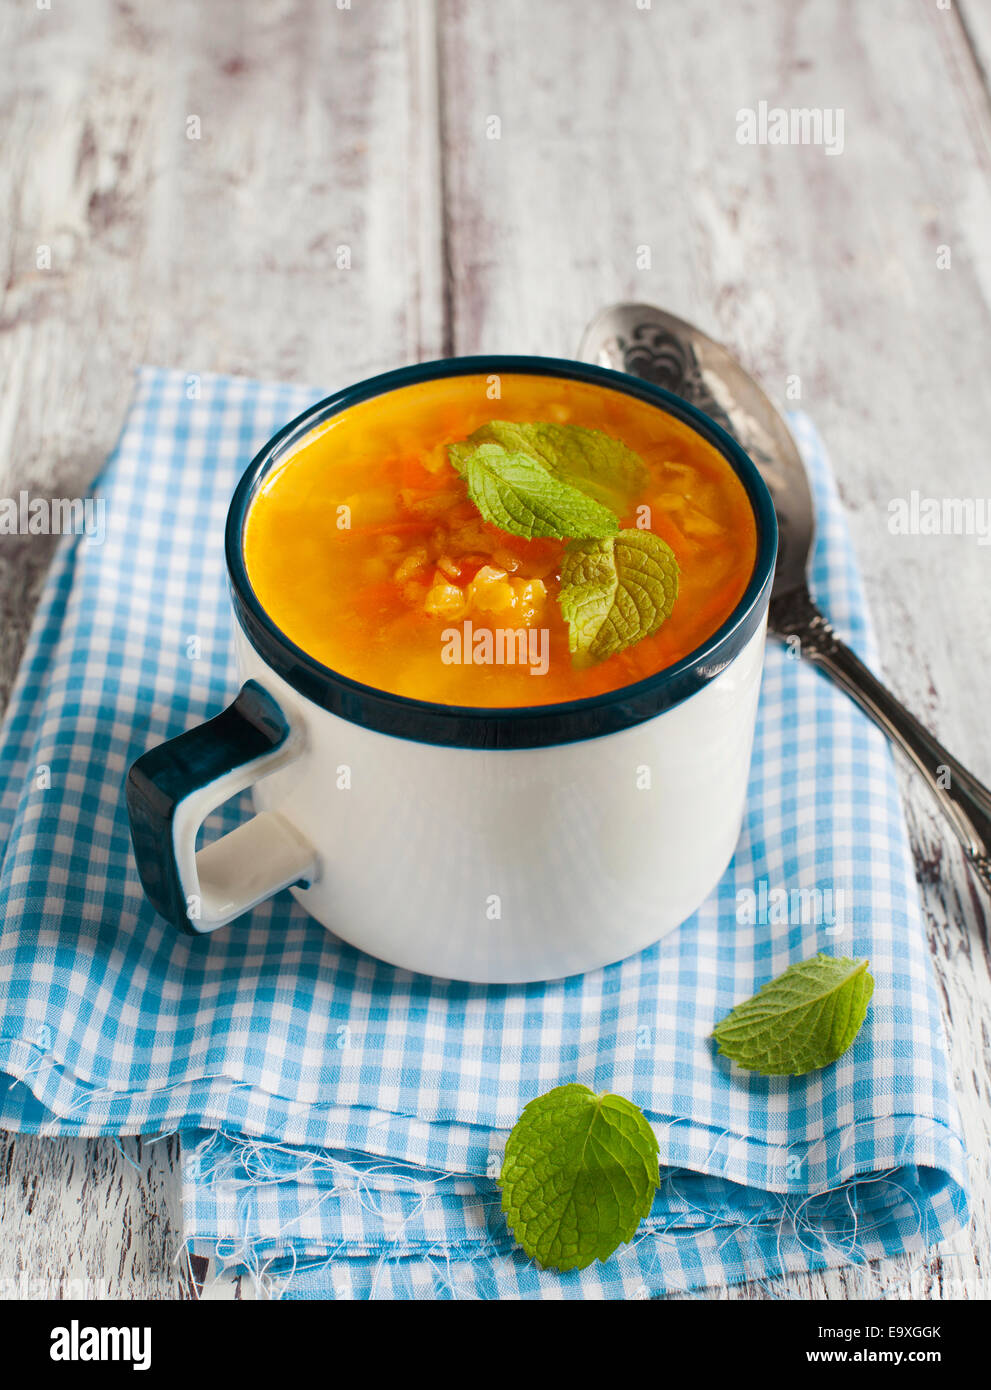 Carrot and ginger soup with red lentils Stock Photo